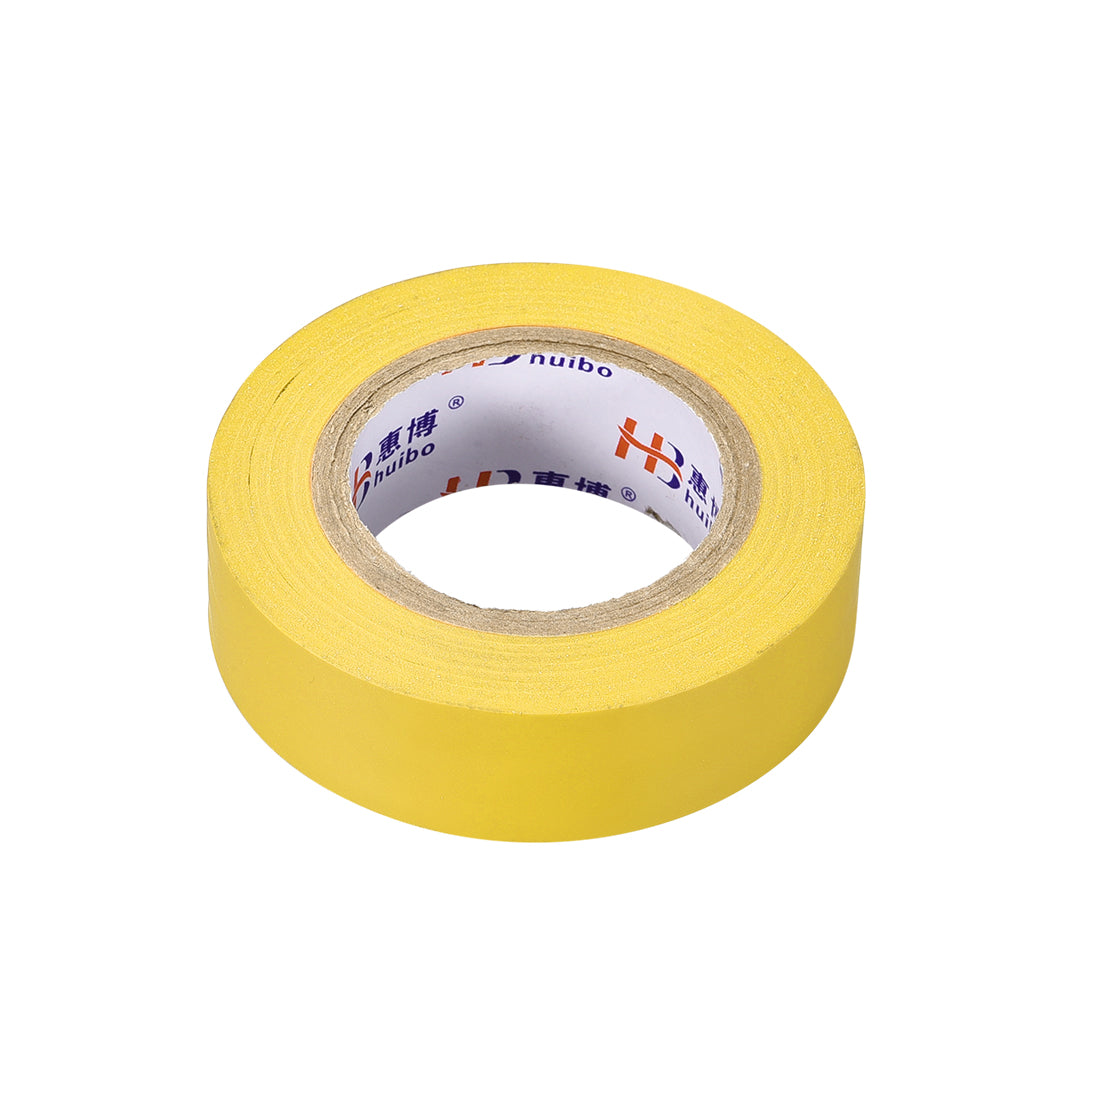 uxcell Uxcell Insulating Tape 19mm Width 14.5M Long 0.15mm Thick PVC Electrical Tape Rated for Max. 400V  80C Use Yellow 2pcs